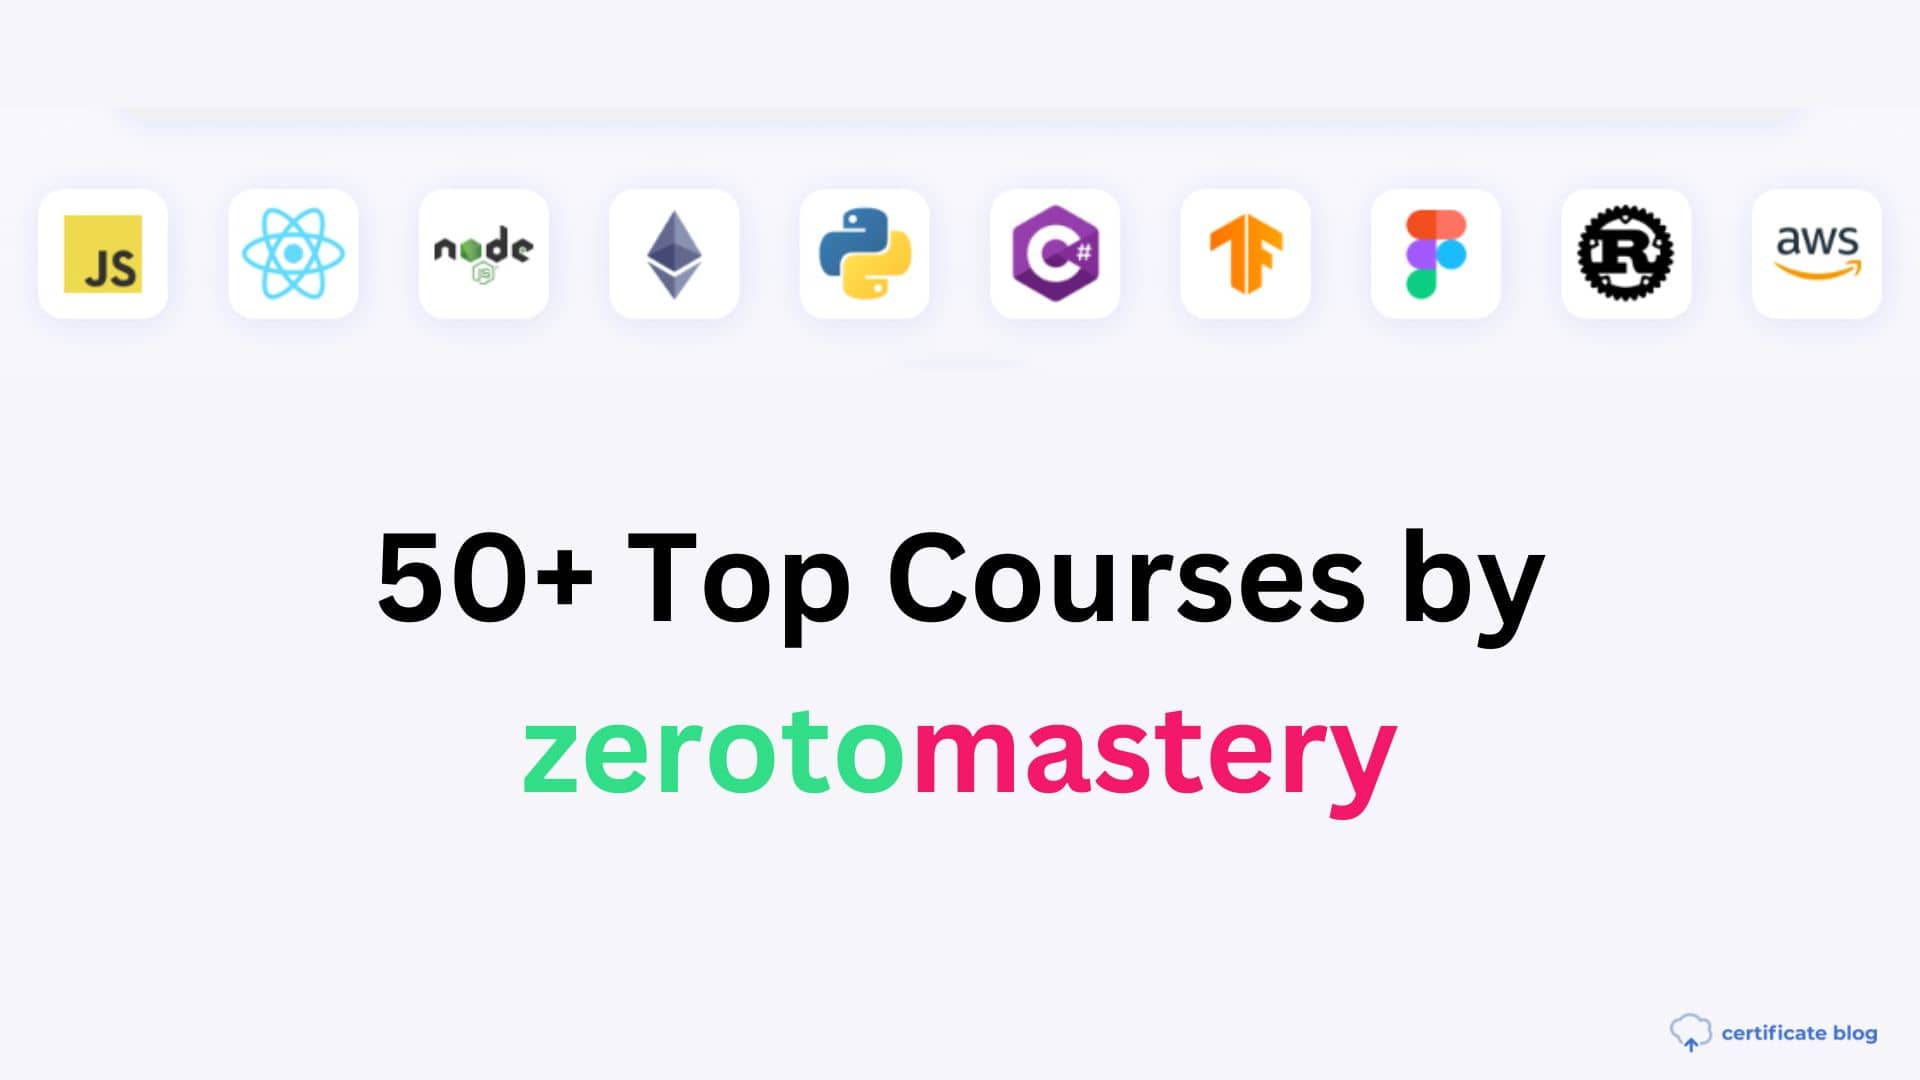 50+ Top Courses by zerotomastery